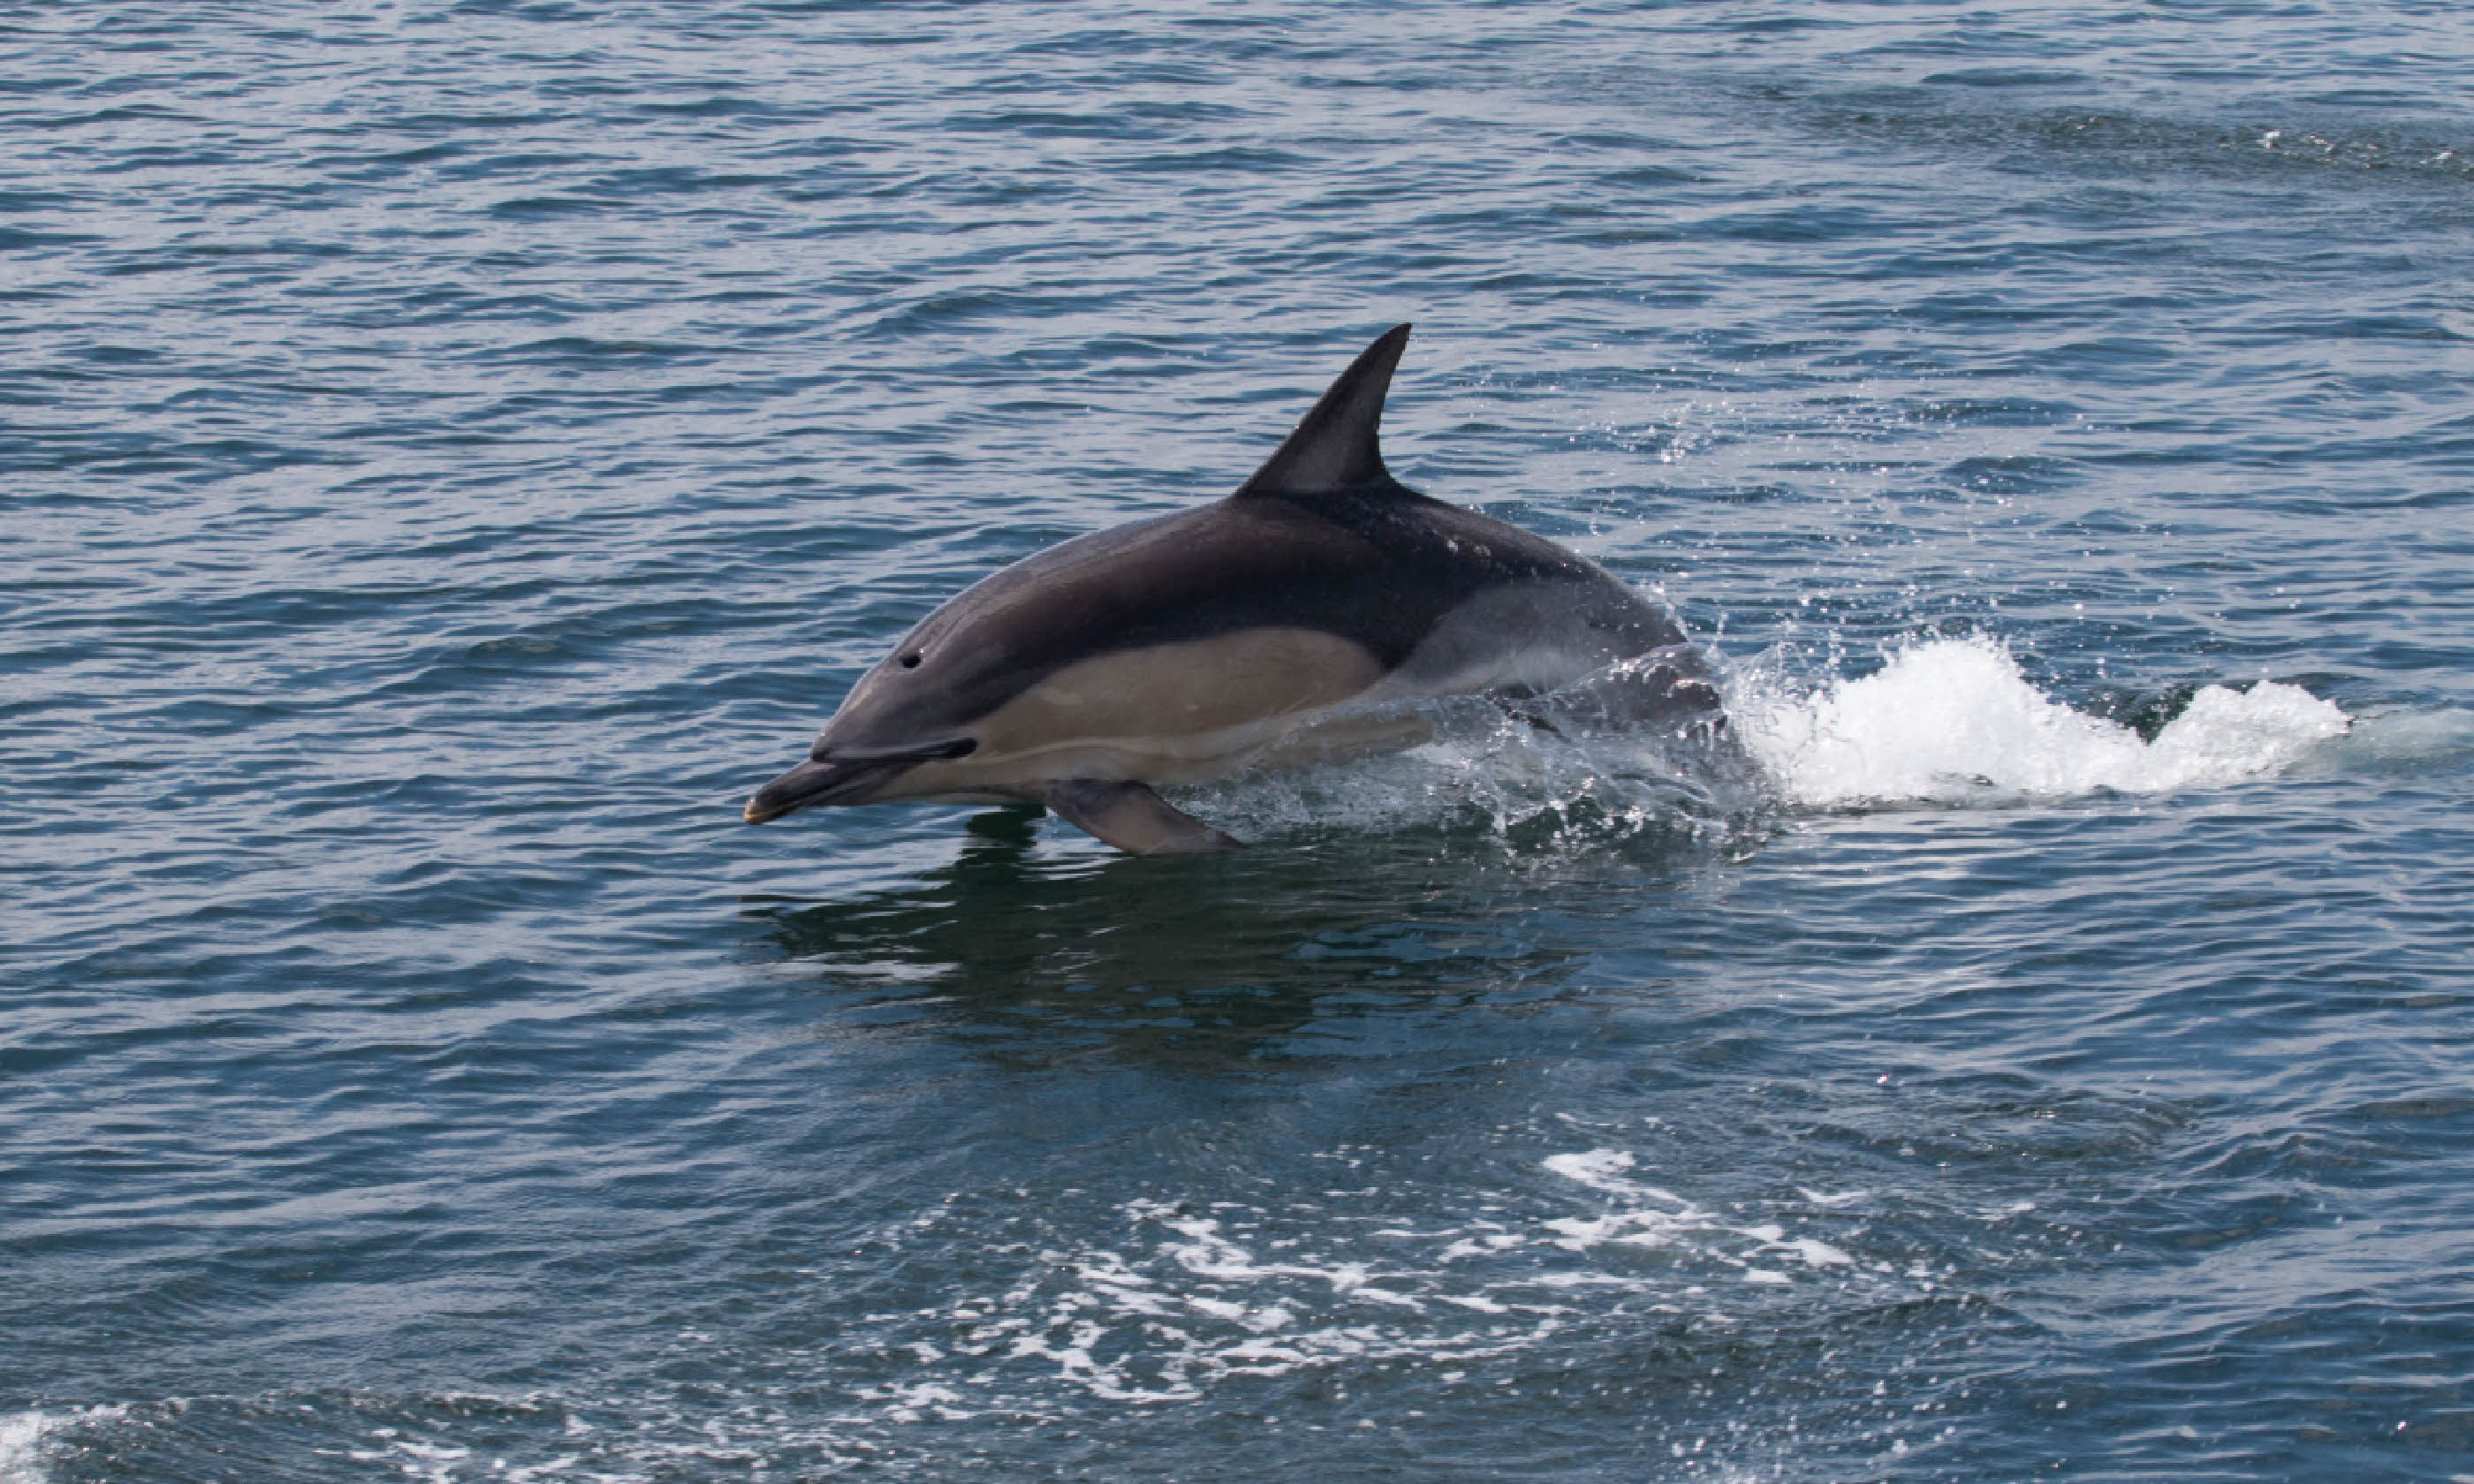 Dolphin in Scotland (Flickr Creative Commons: James West)